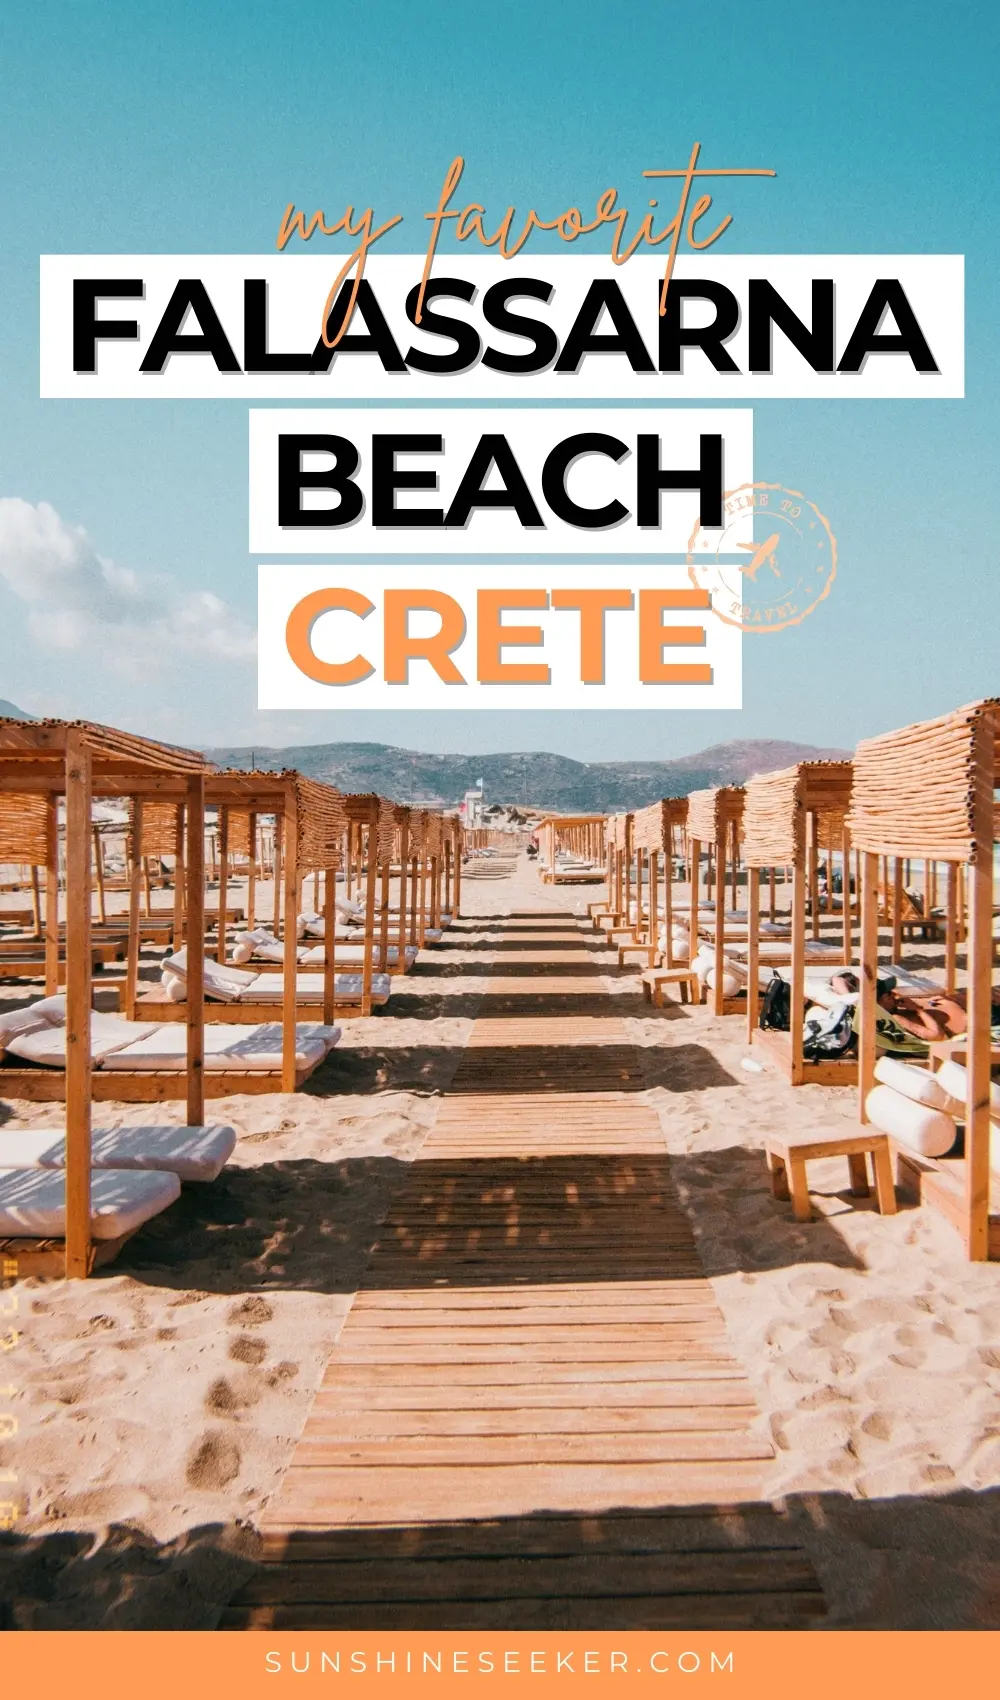 Click through for a complete guide to Falassarna Beach in Crete. Falasarna is my favorite beach on the island and a must on any Crete itinerary.